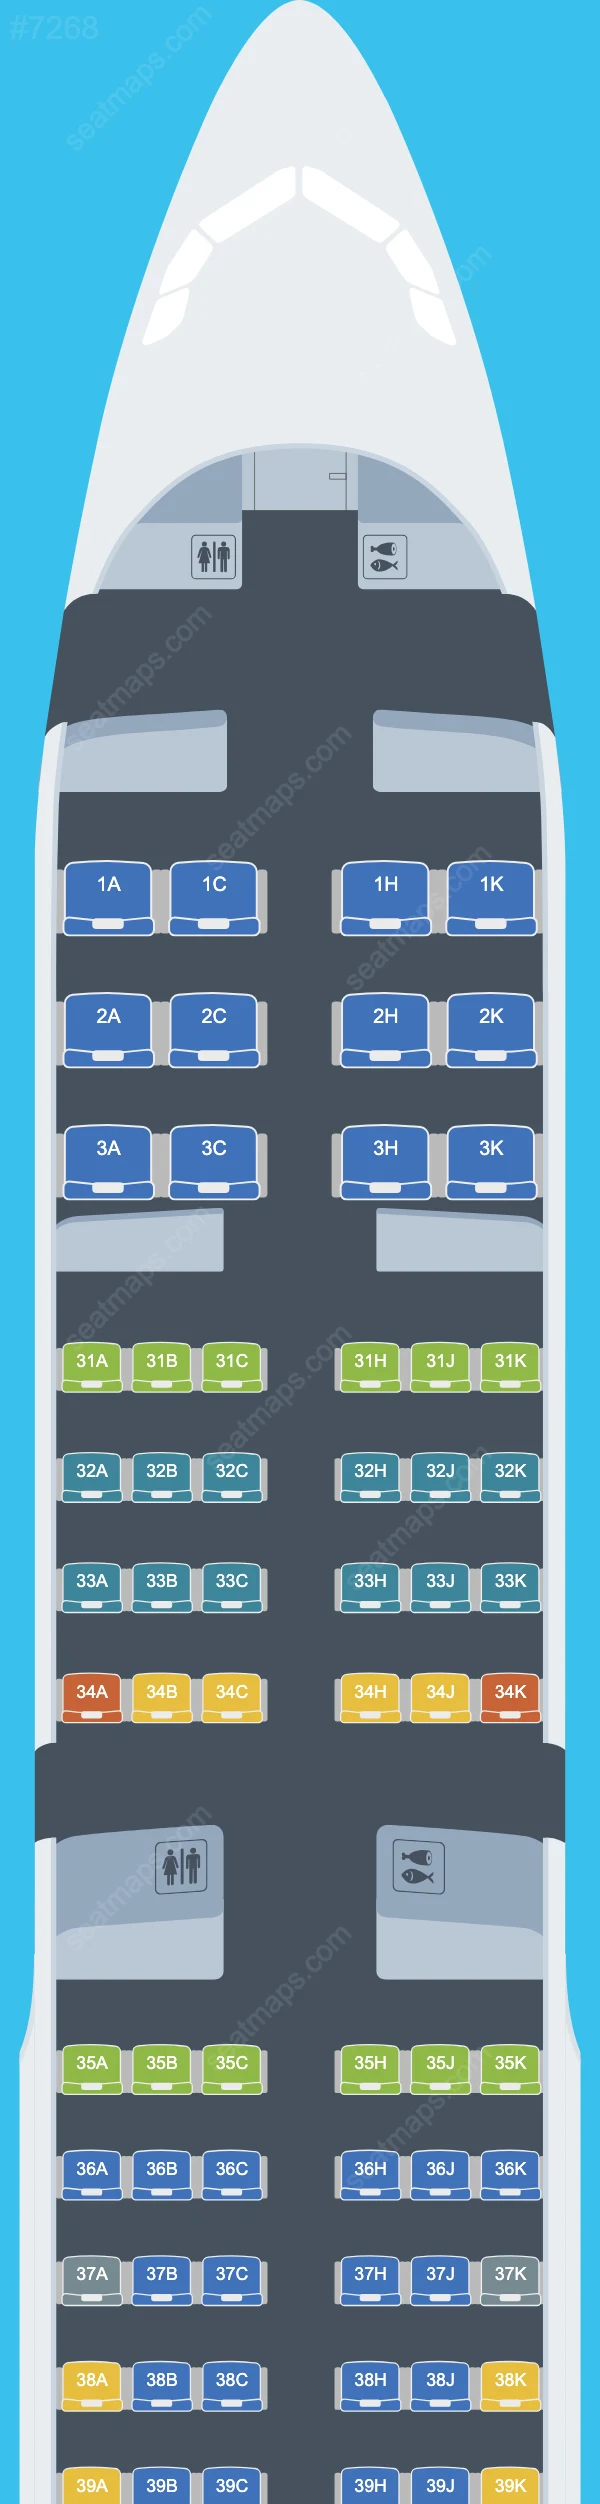 China Southern Airbus A321 Seat Maps A321-200 V.2